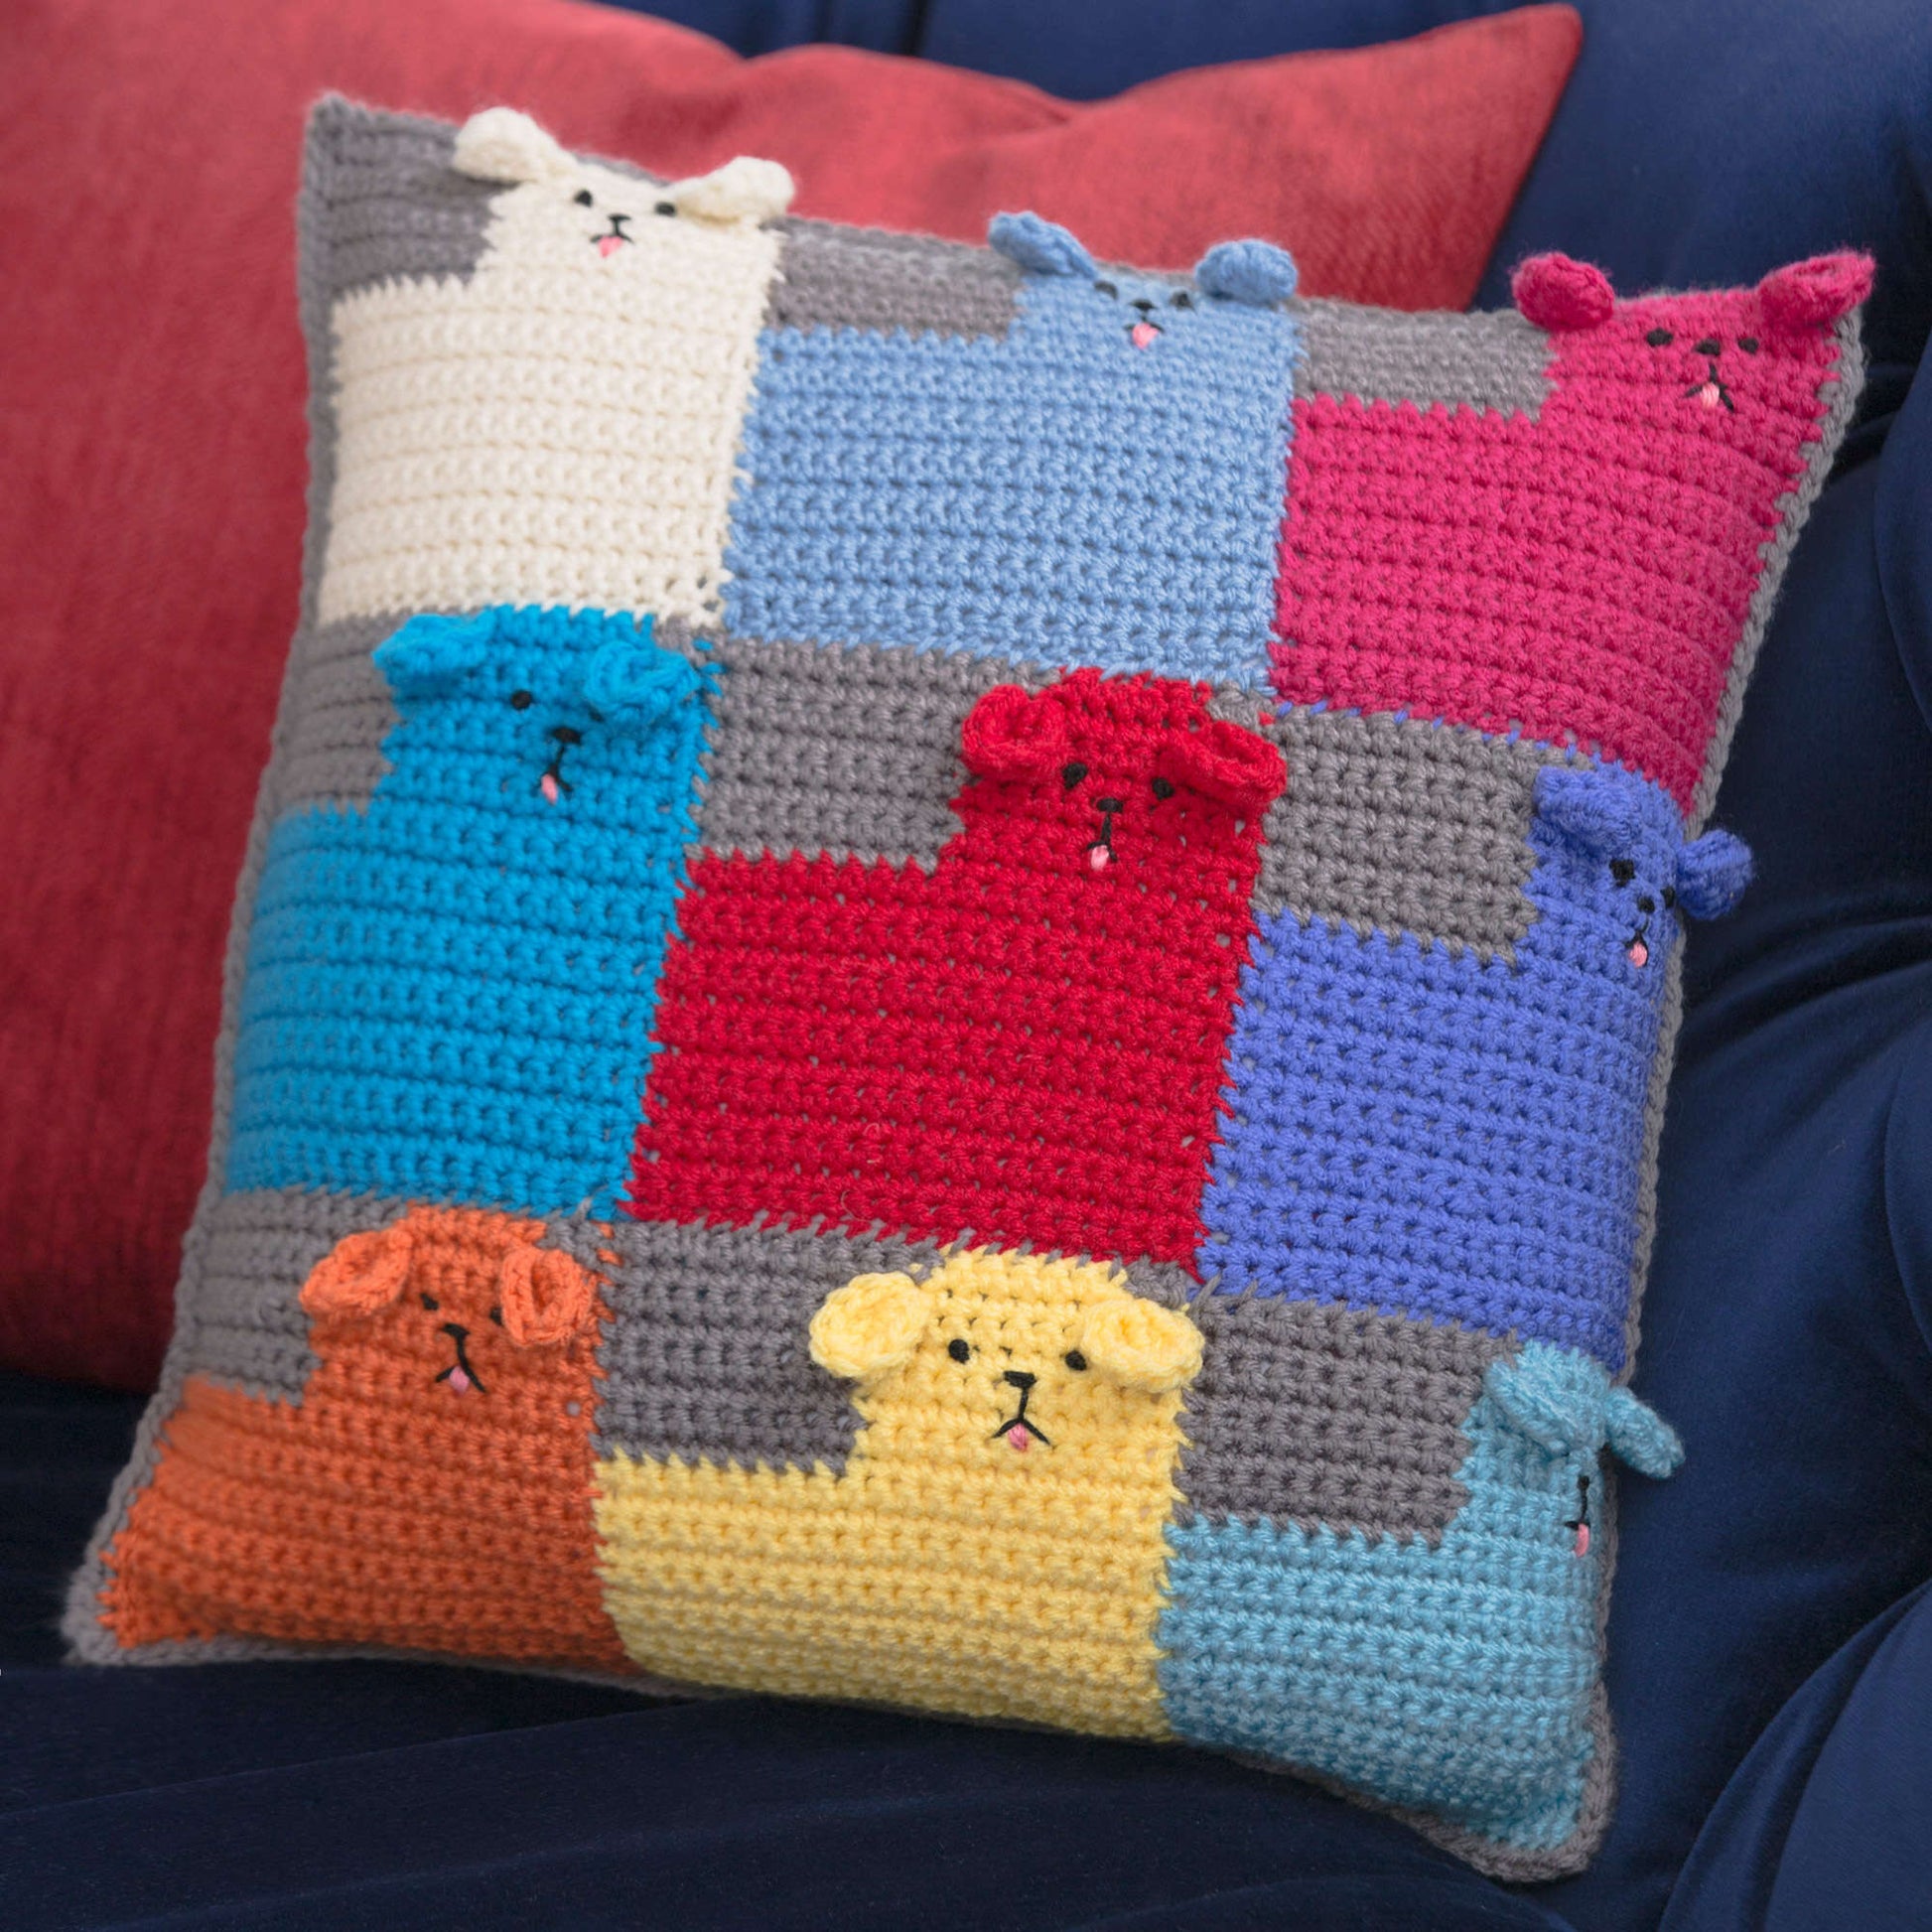 Free Red Heart Kittens And Puppies For Sale Pillows Crochet Pattern